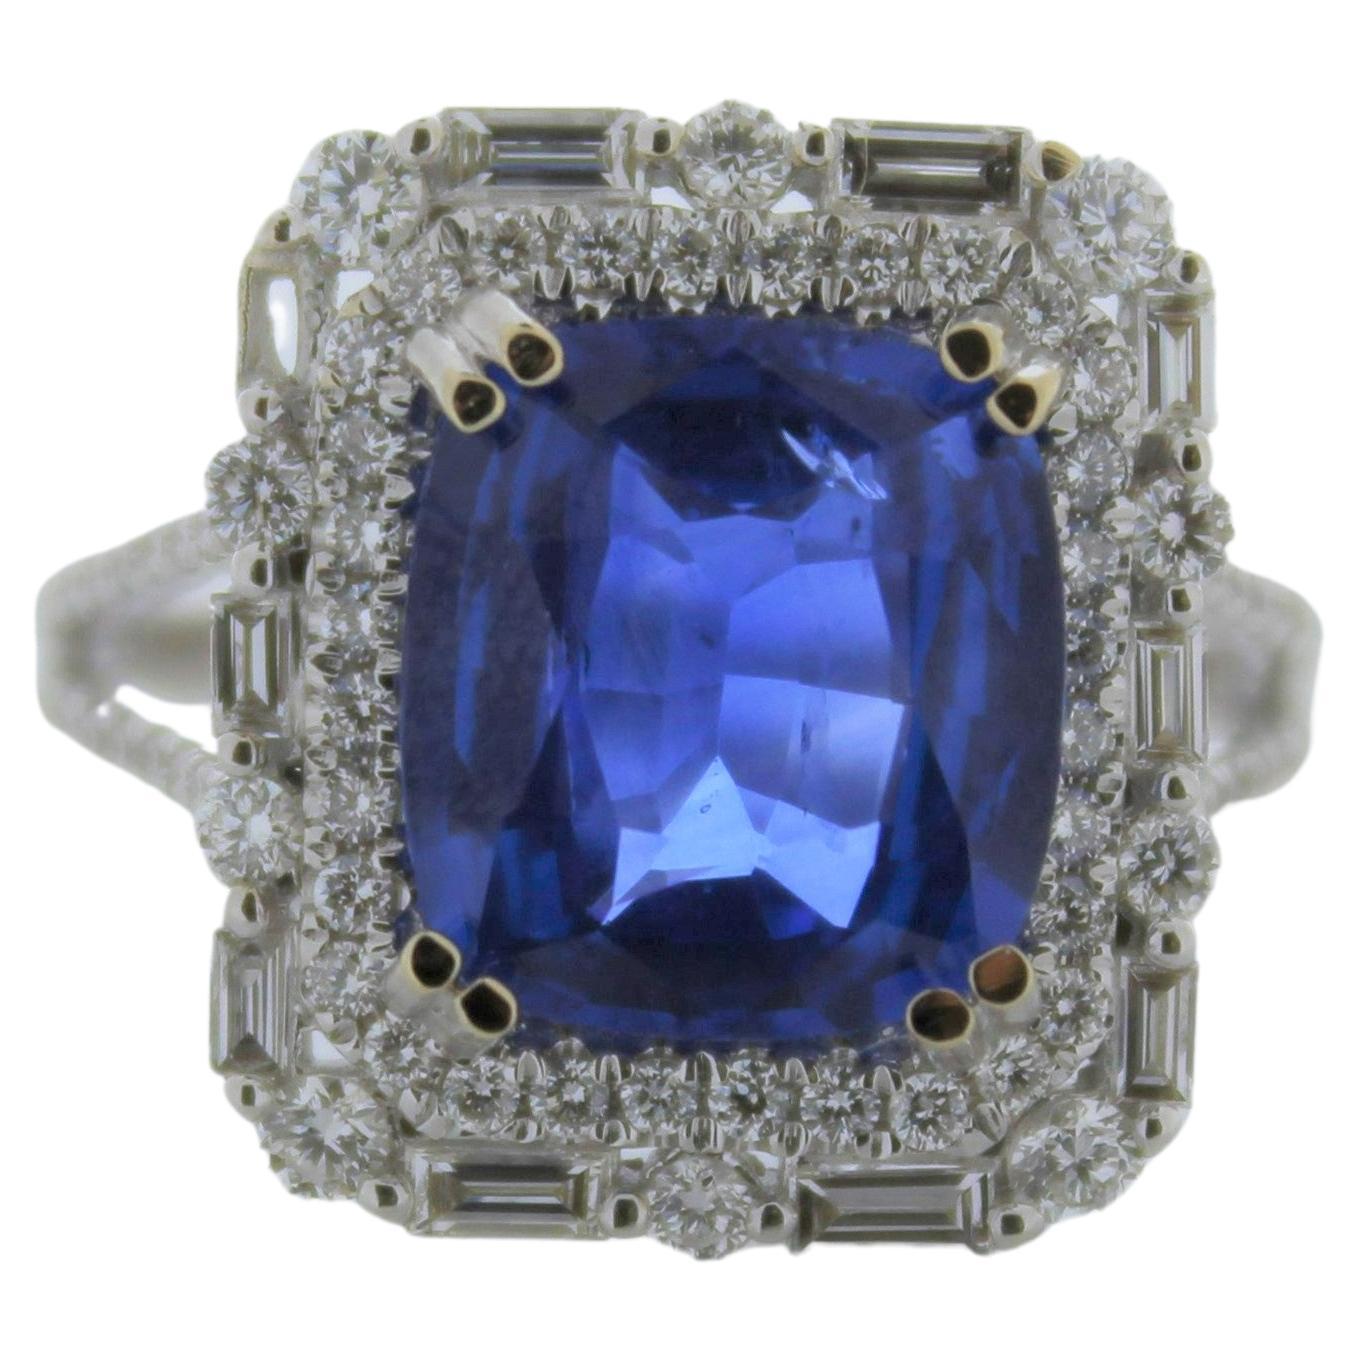 4.53ctw Blue Sapphire Cushion and 1.85ctw Diamond Ring in 18k White Gold For Sale